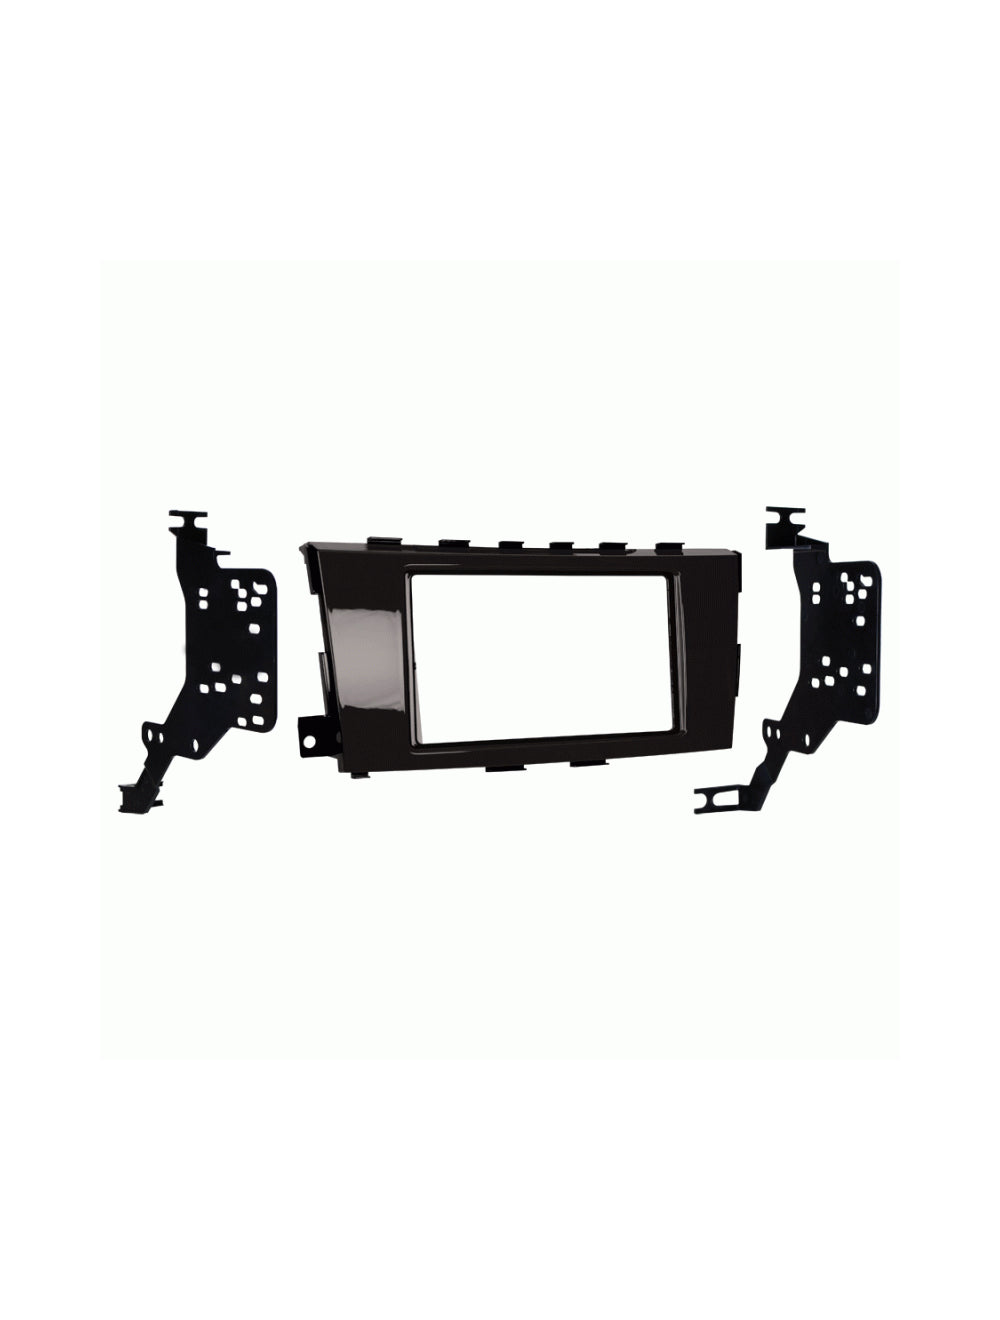 Metra 95-7617GHG Double DIN Dash Kit for Select 2013-2015 Nissan Altima Vehicles Black